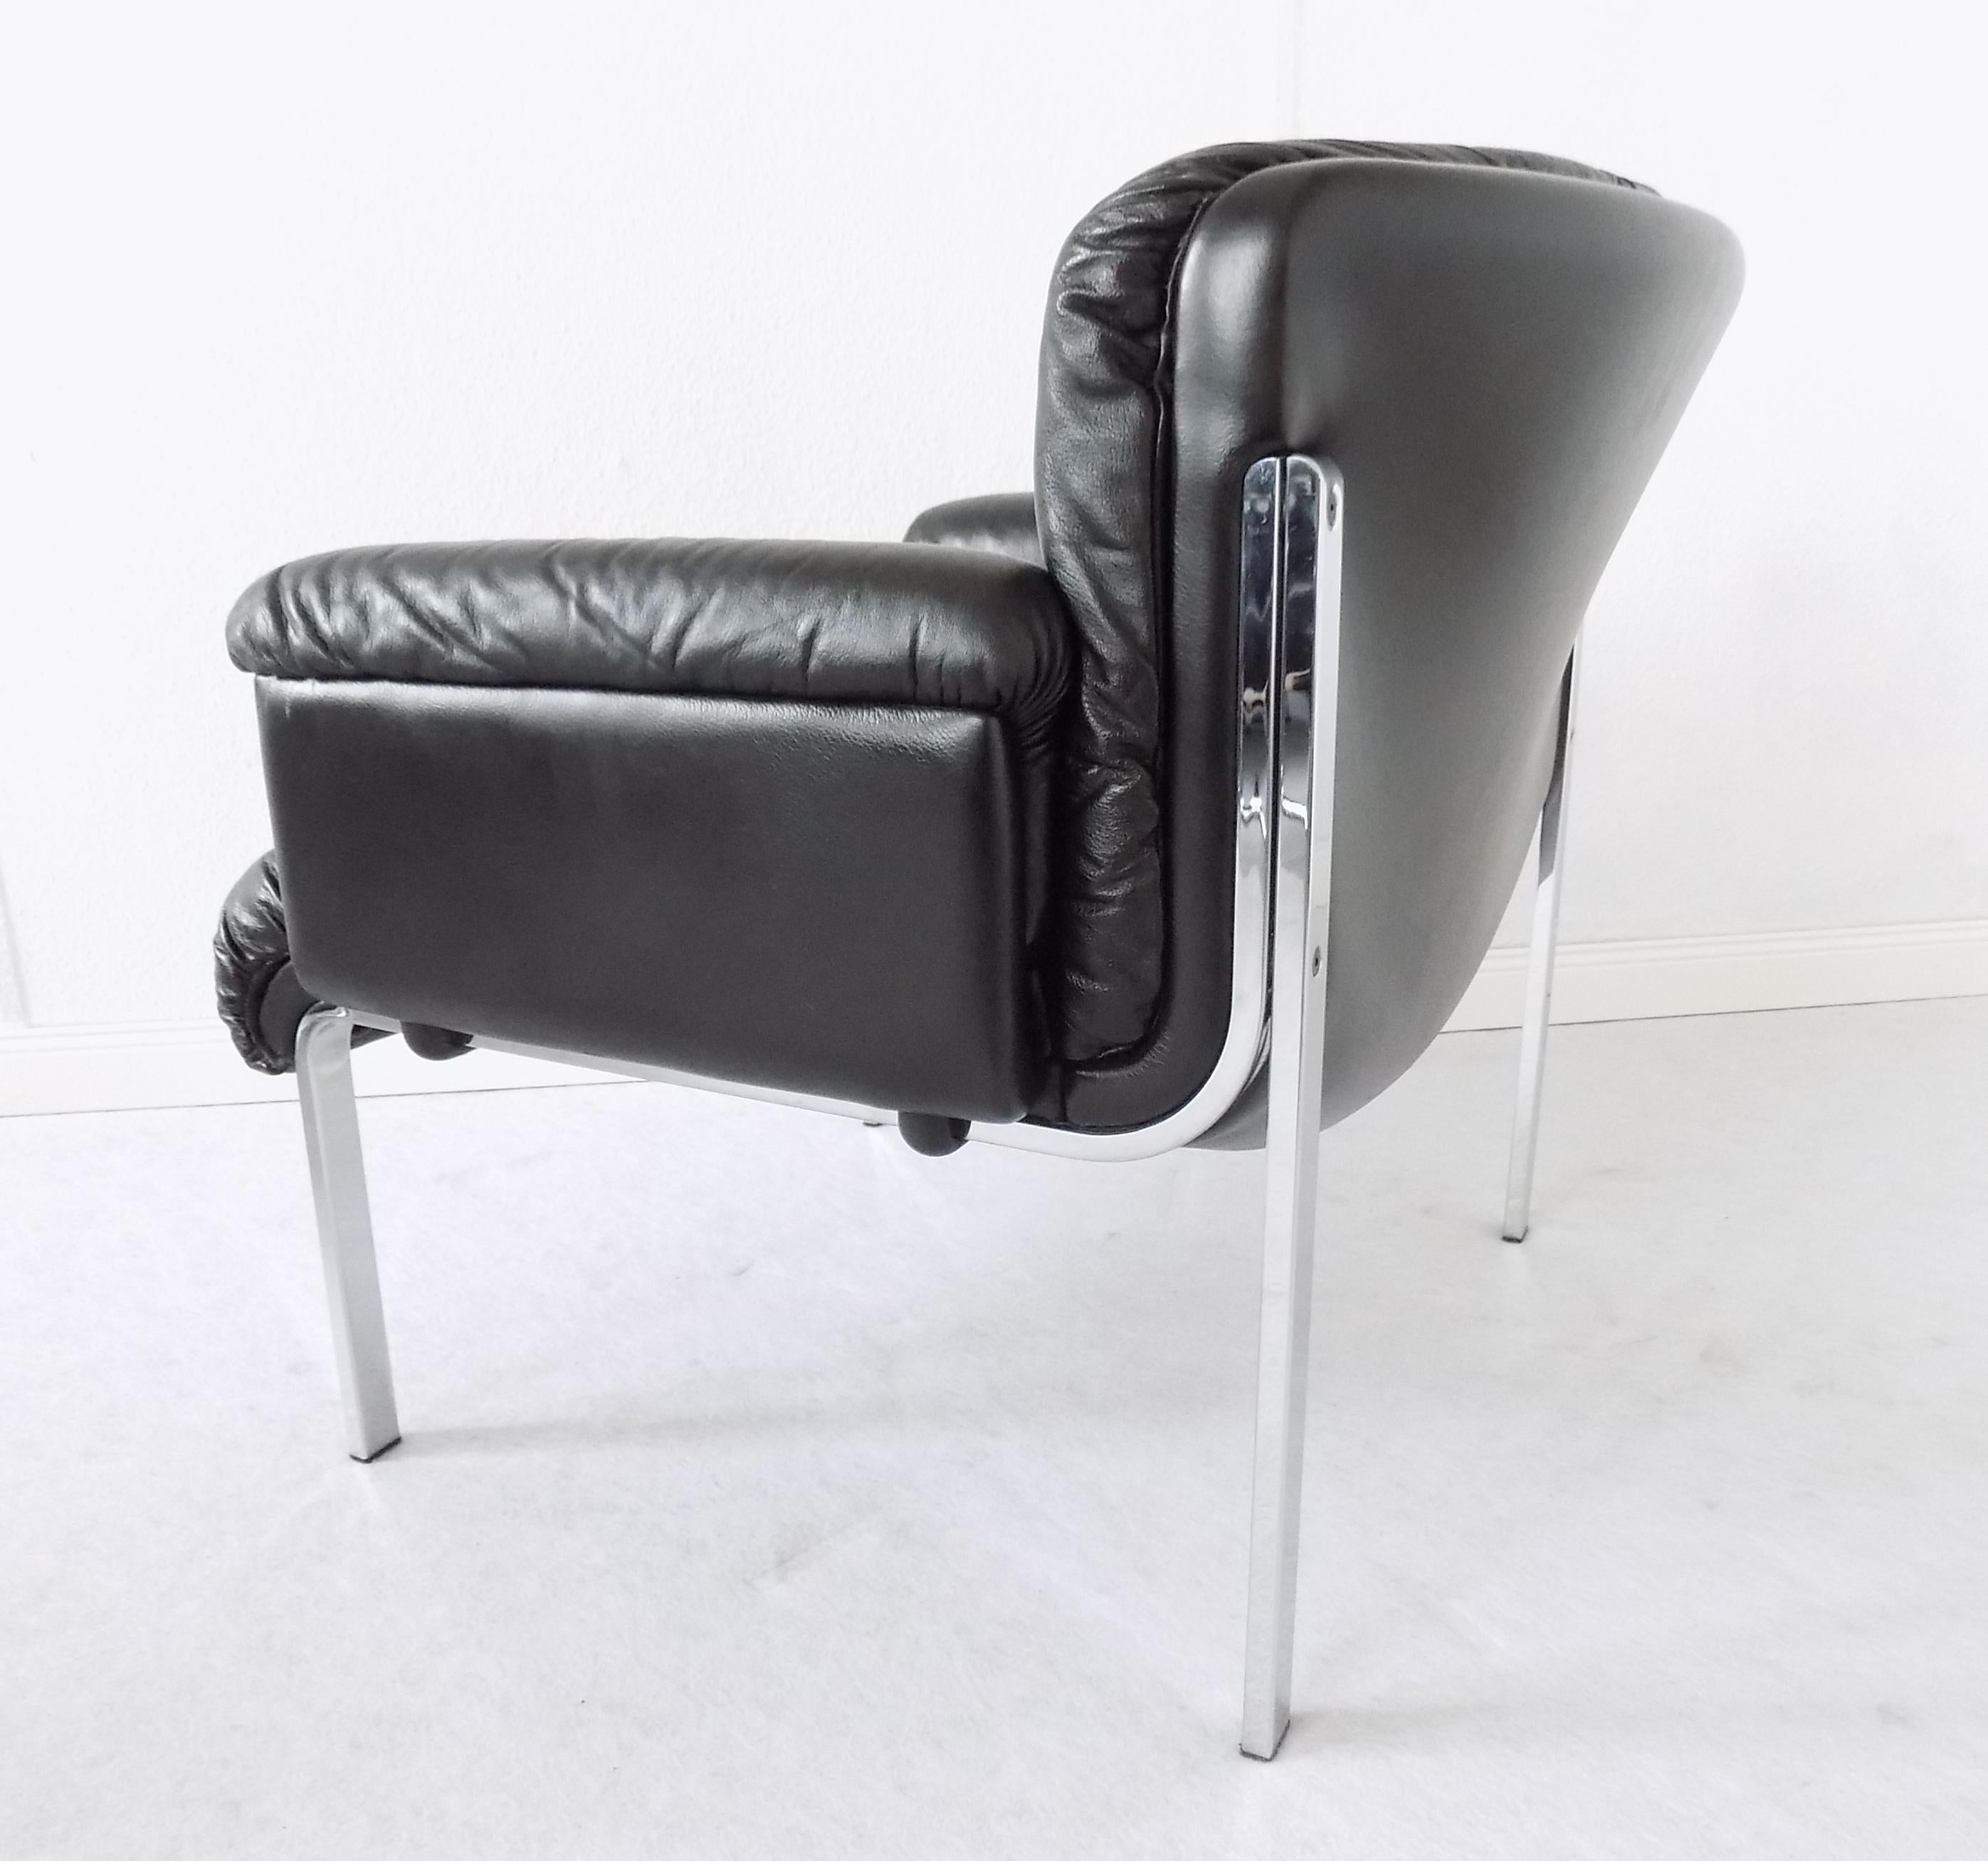 Girsberger Eurochair Black Leather Lounge Chair, Swiss made, Mid-Century modern

This black Eurochair comes in excellent condition. The armrests show some good patina, the leather is without any scratches or holes, the chrome looks like new.